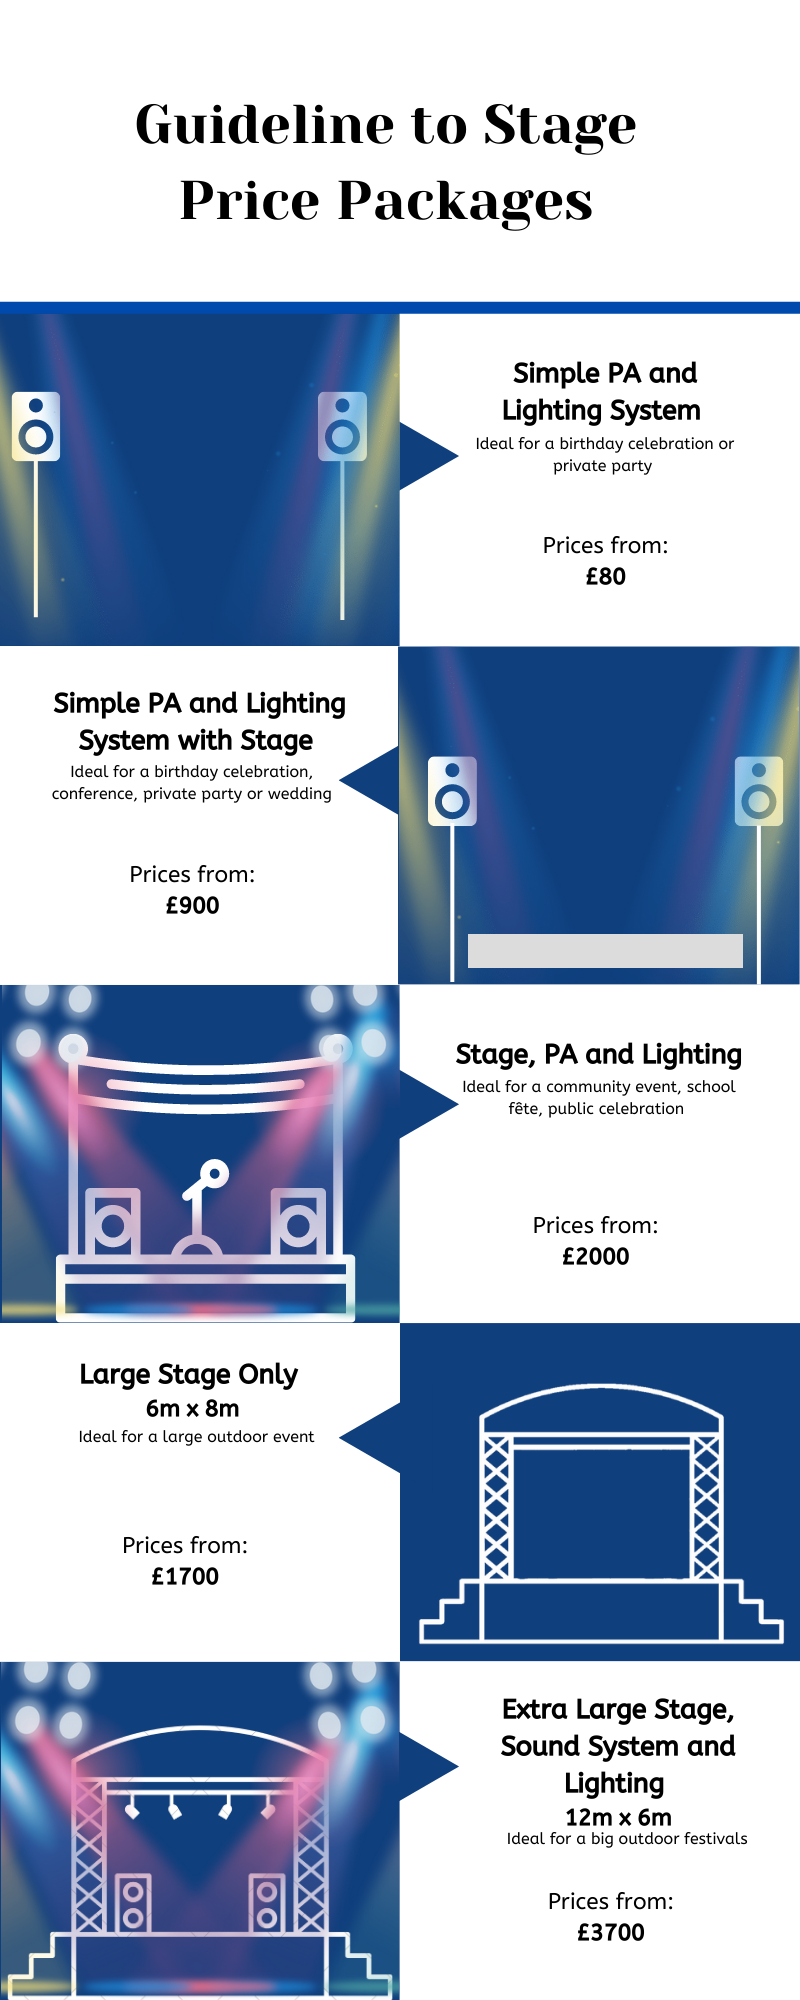 Infographic with details of staging packages and their associated prices.